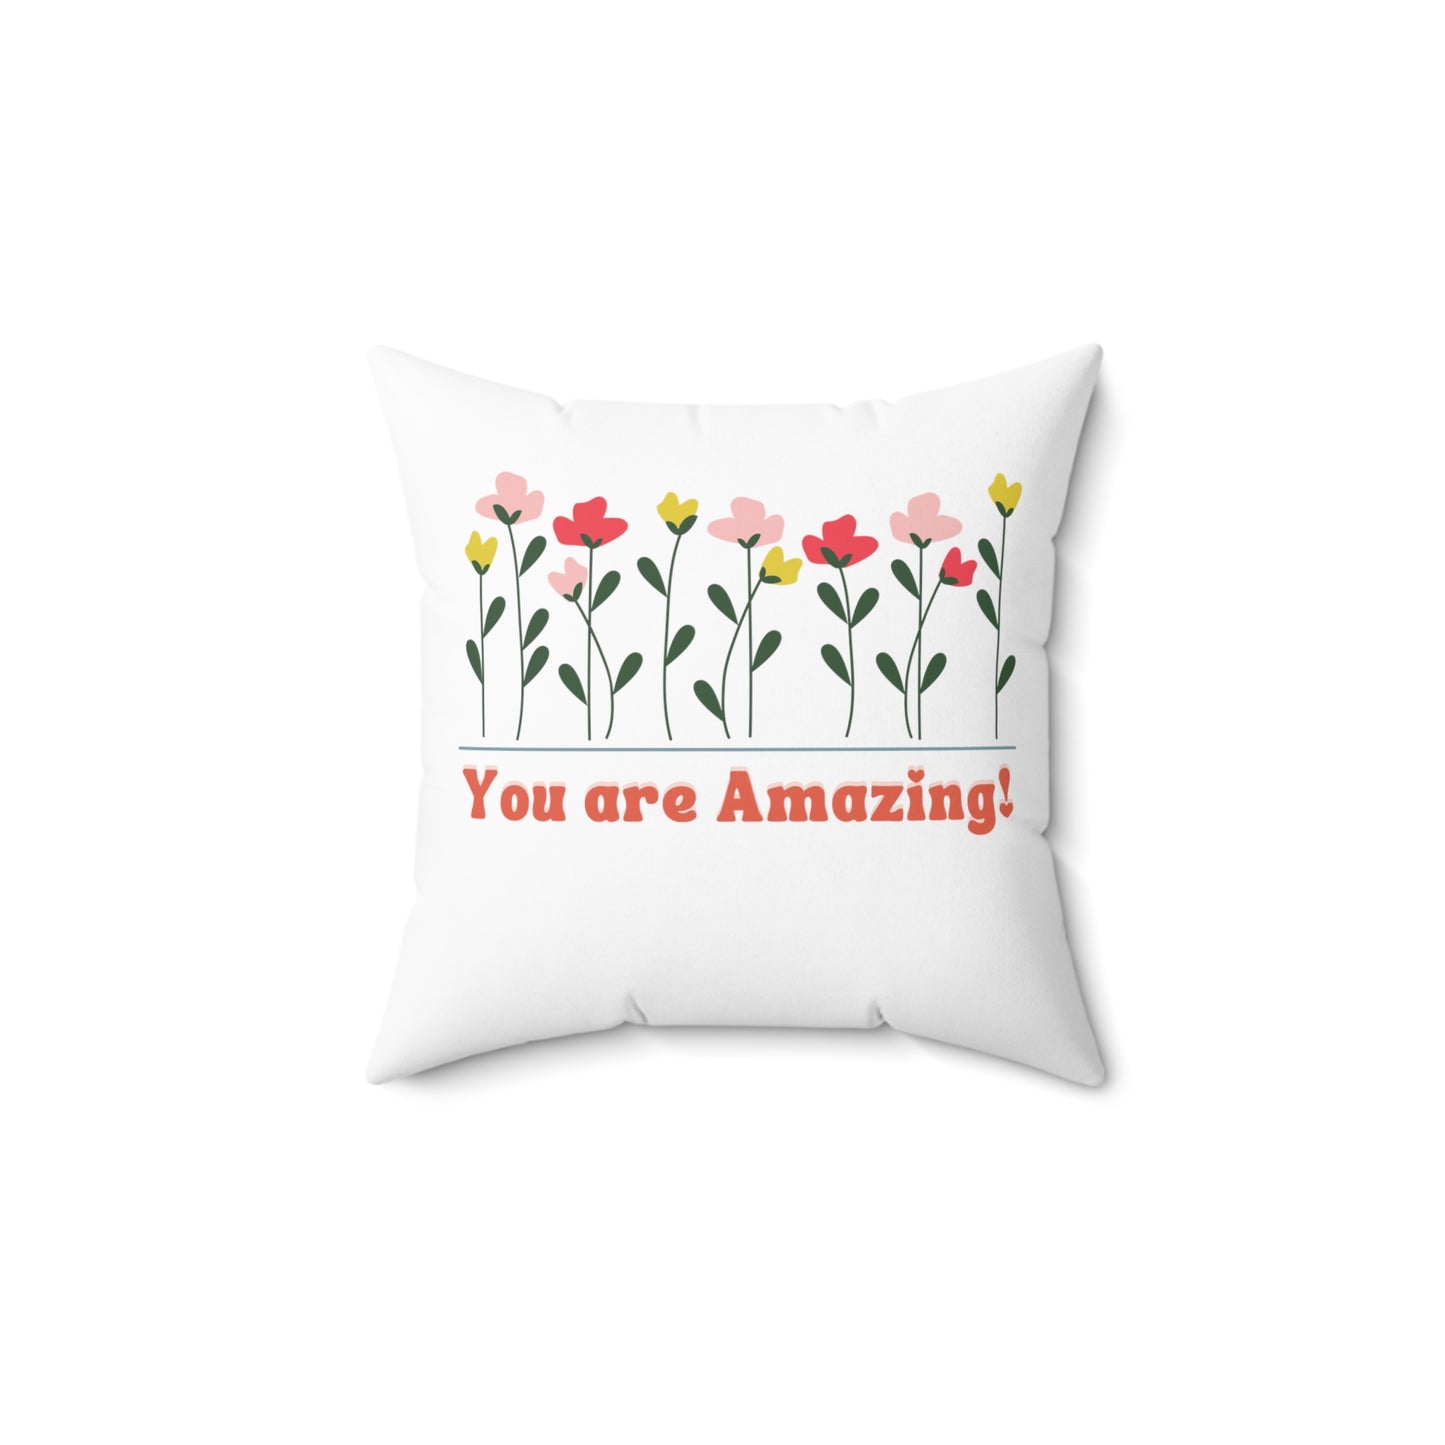 You are Amazing Spun Polyester Square Pillow